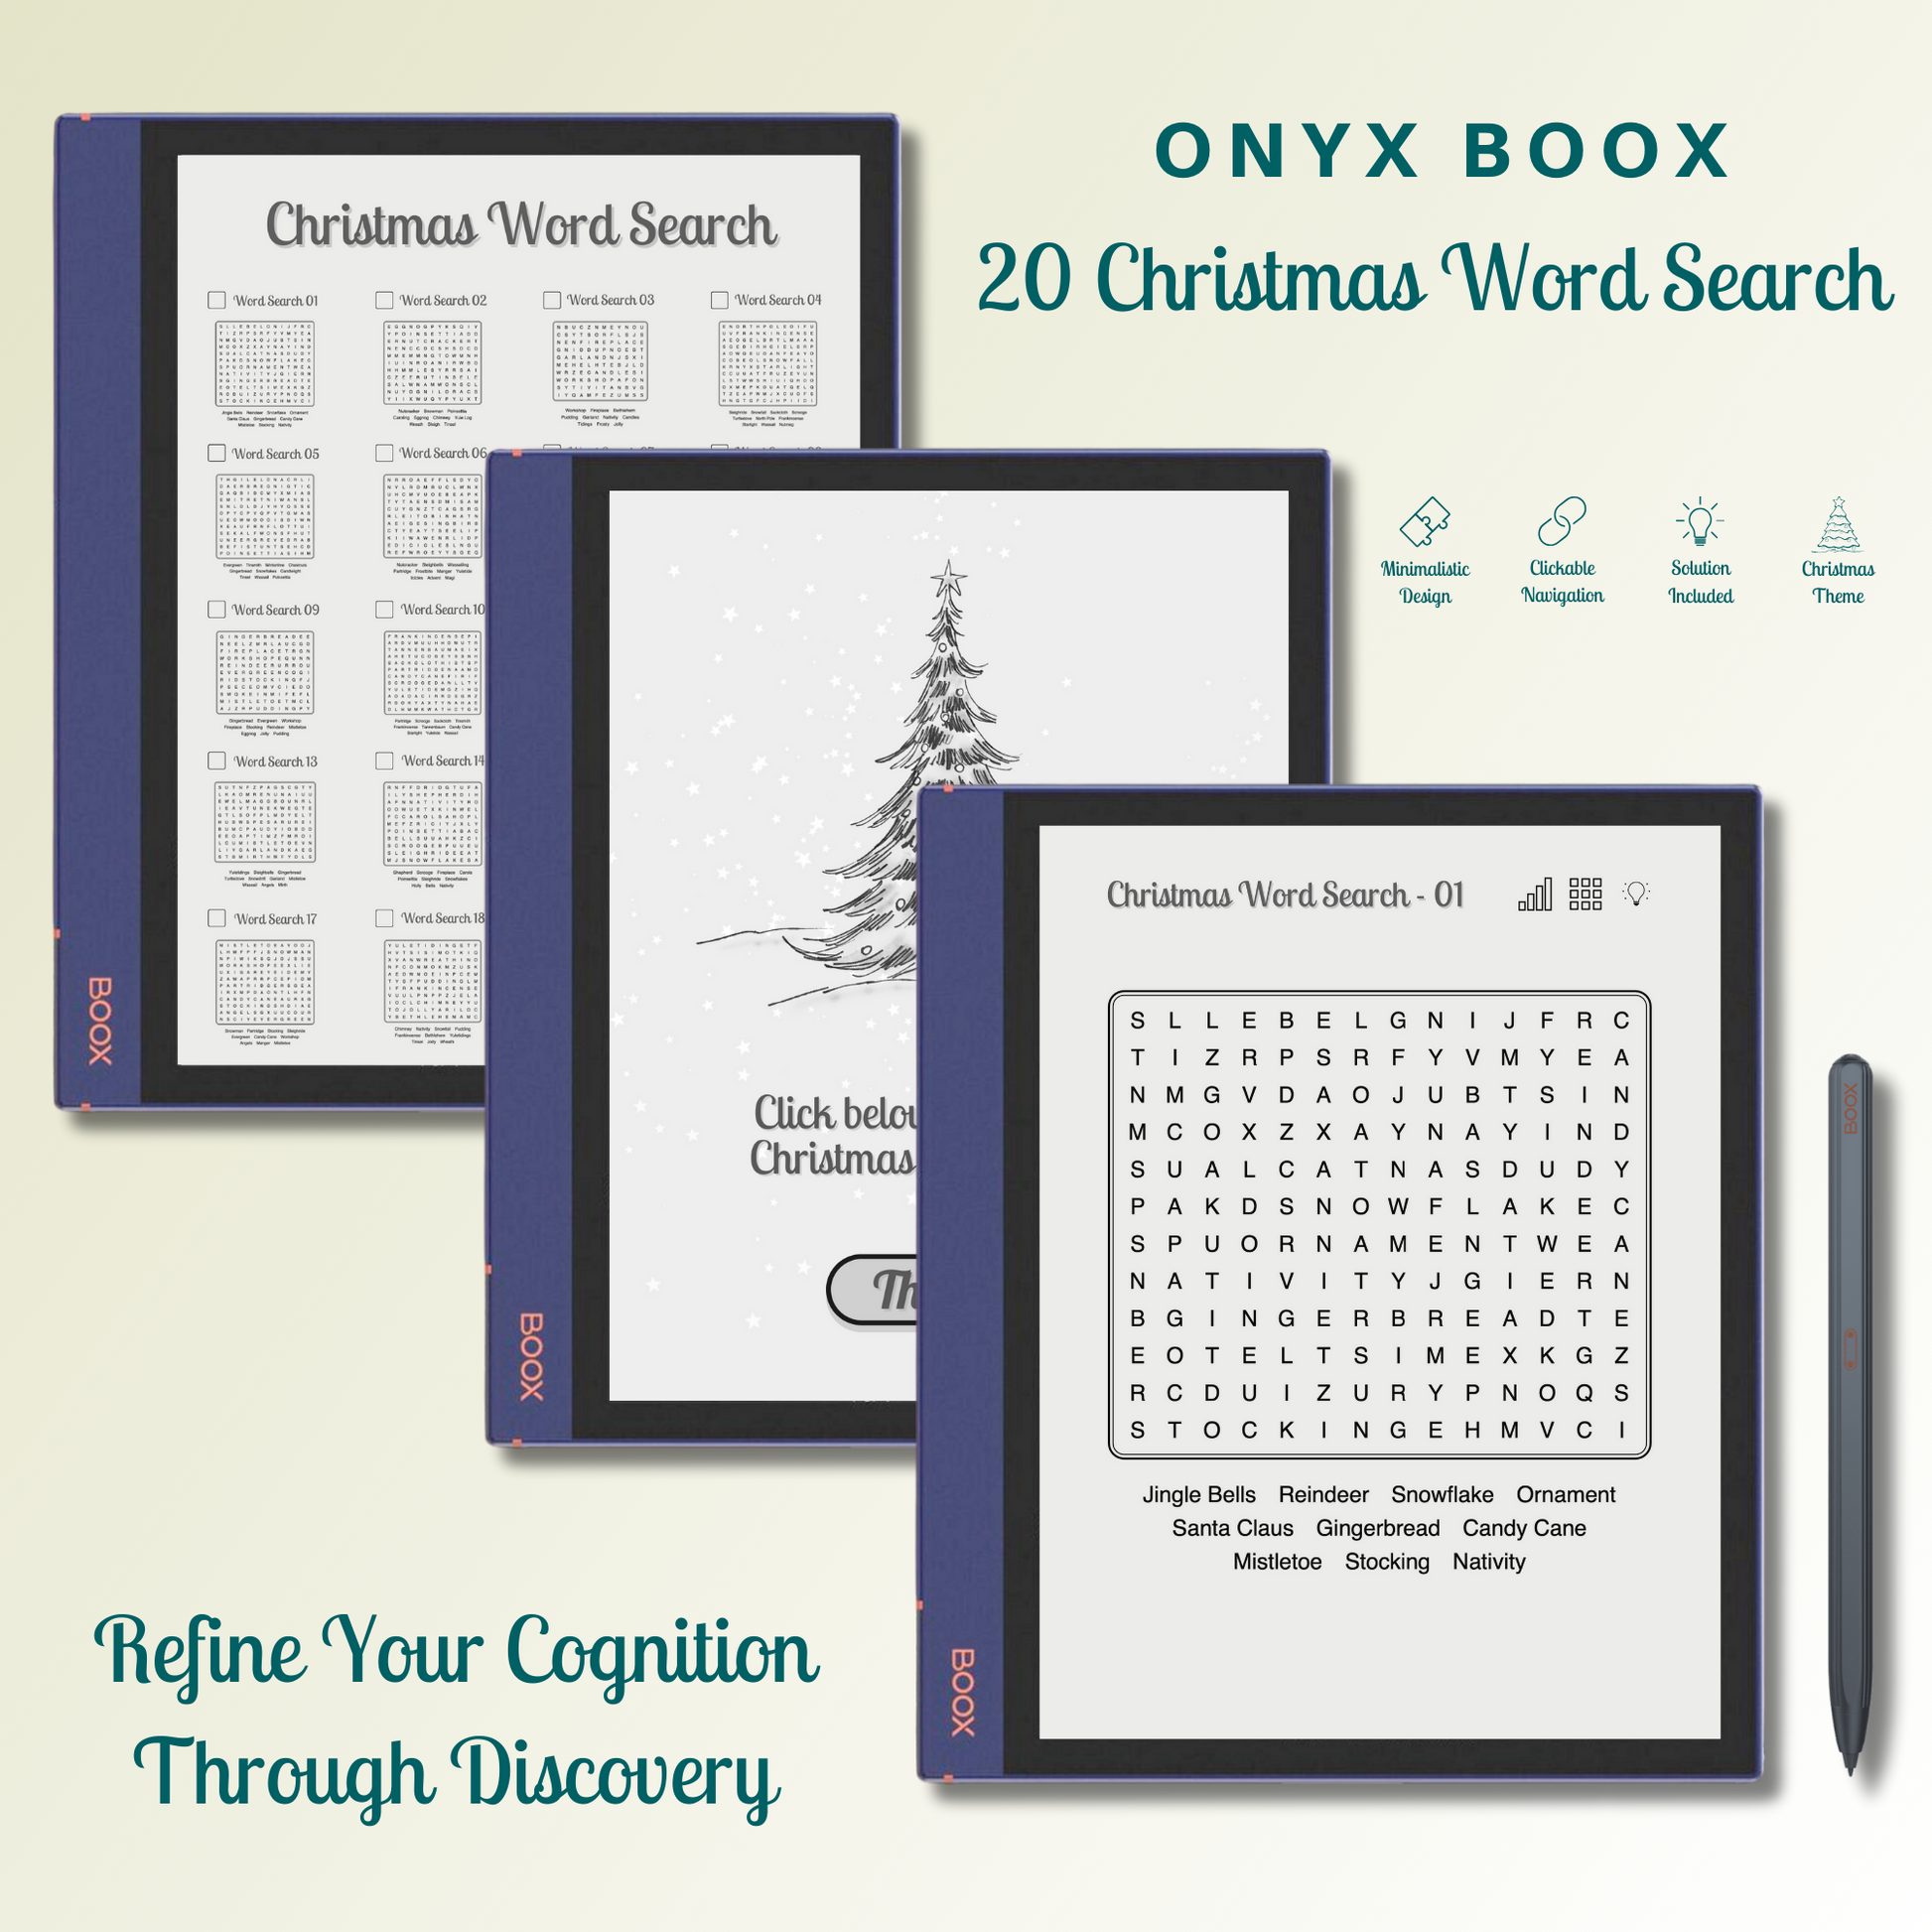 This is a Digital Download of 20 Christmas Word Search Puzzles designed for Onyx Boox. Compatible with Boox Note Air 1, Boox Note Air 2, Boox Note Air Plus, Boox Nova Air, Boox Nova Air C, Boox Tab Ultra and Boox Tab Ultra C.